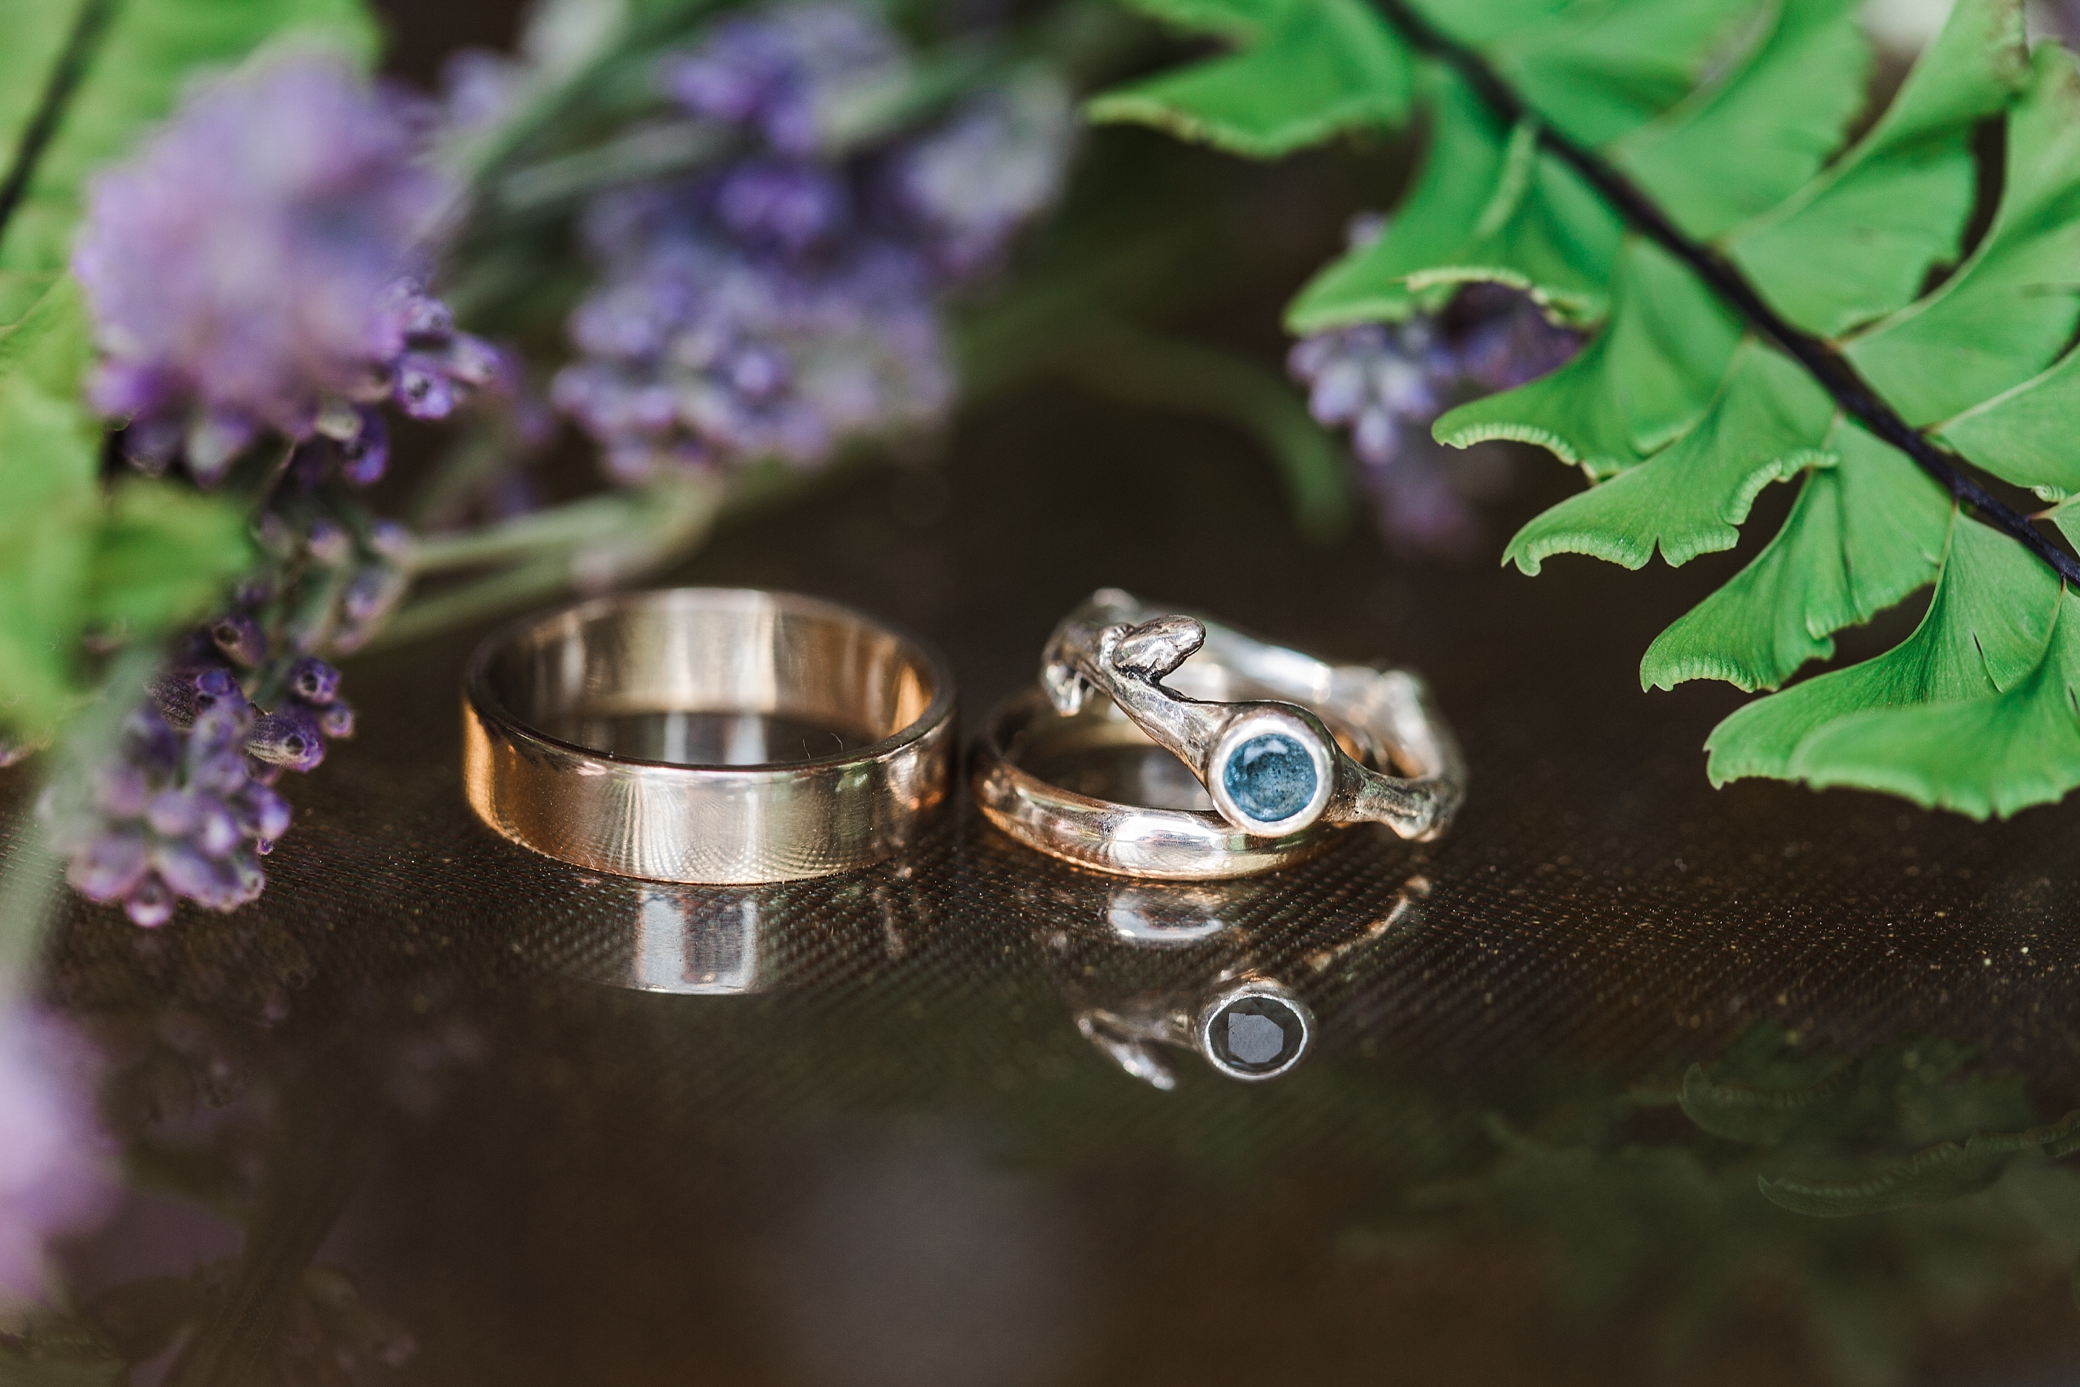 Unique wedding rings designed by With These Rings | Photographed by Megan Montalvo Photography 